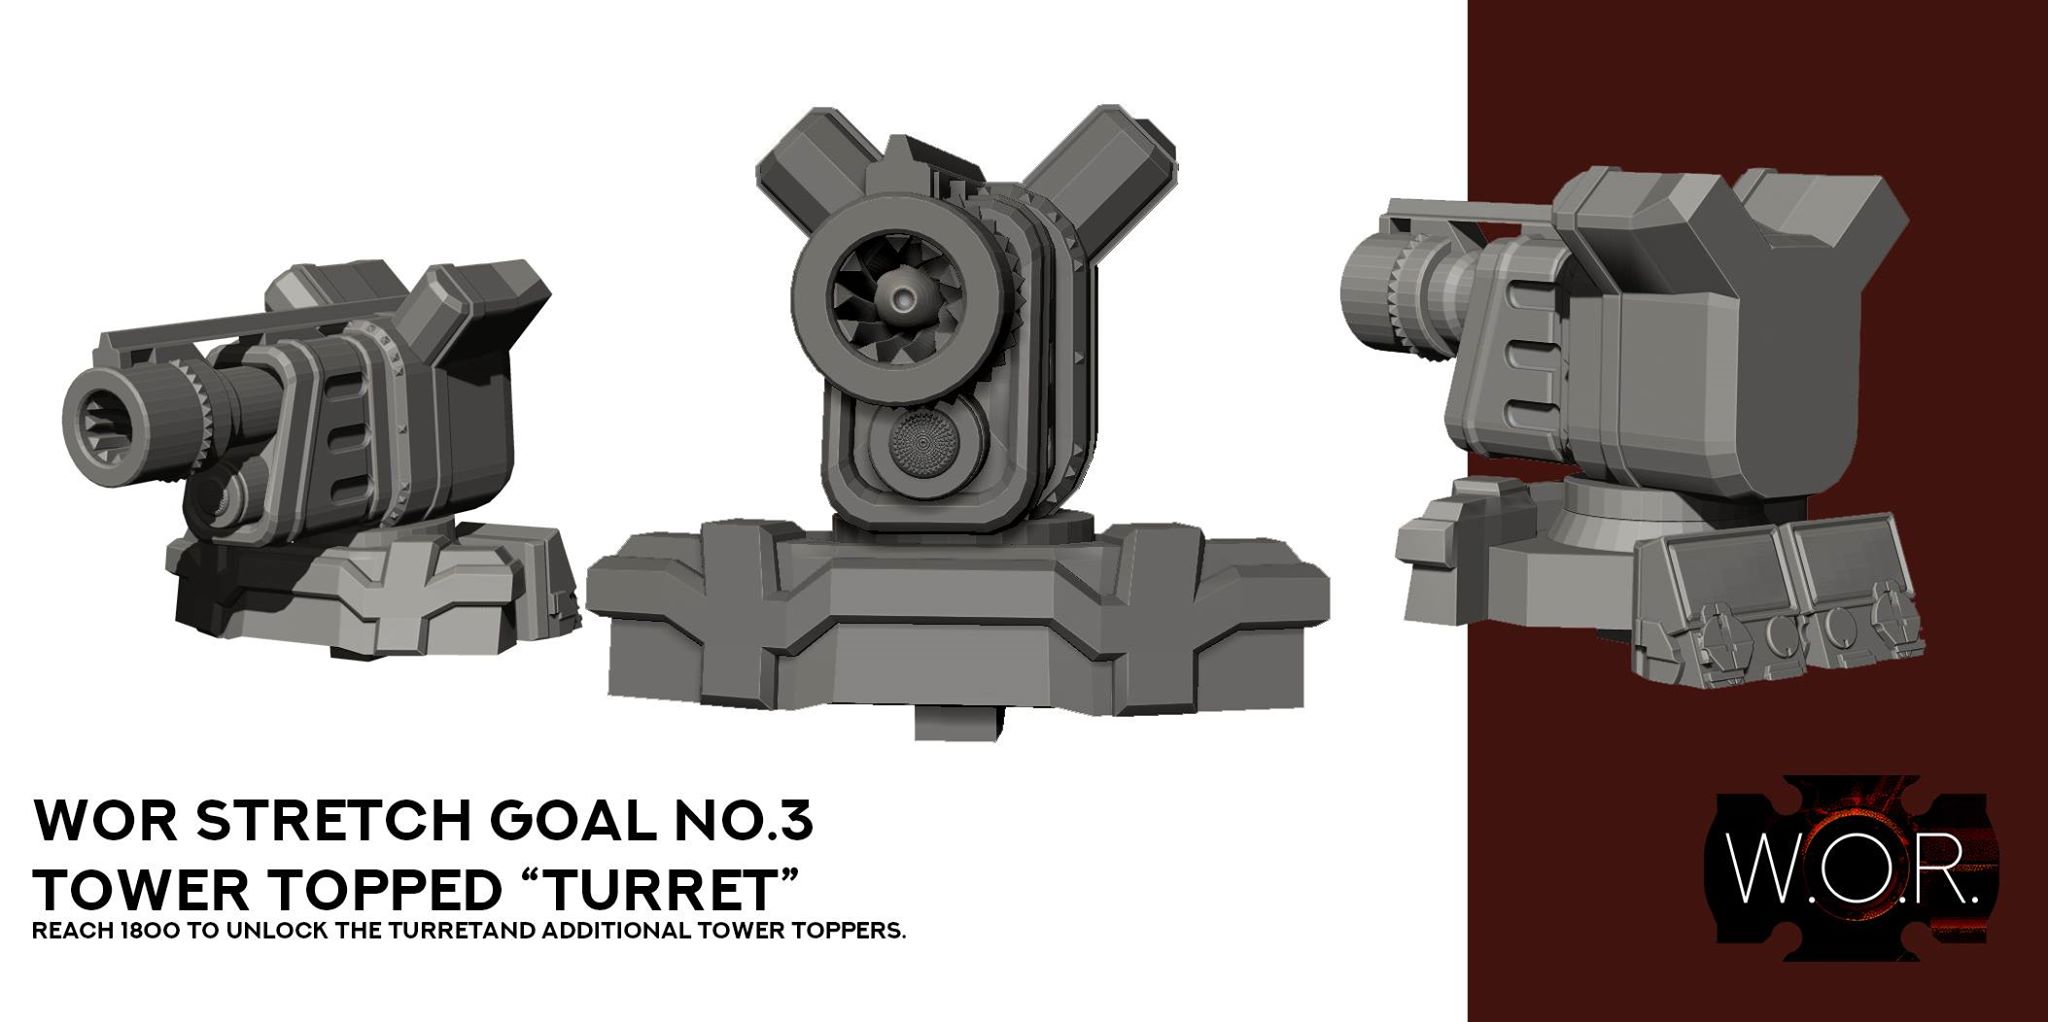 Tower Topped "Turret" - Unlocked stretch Goal